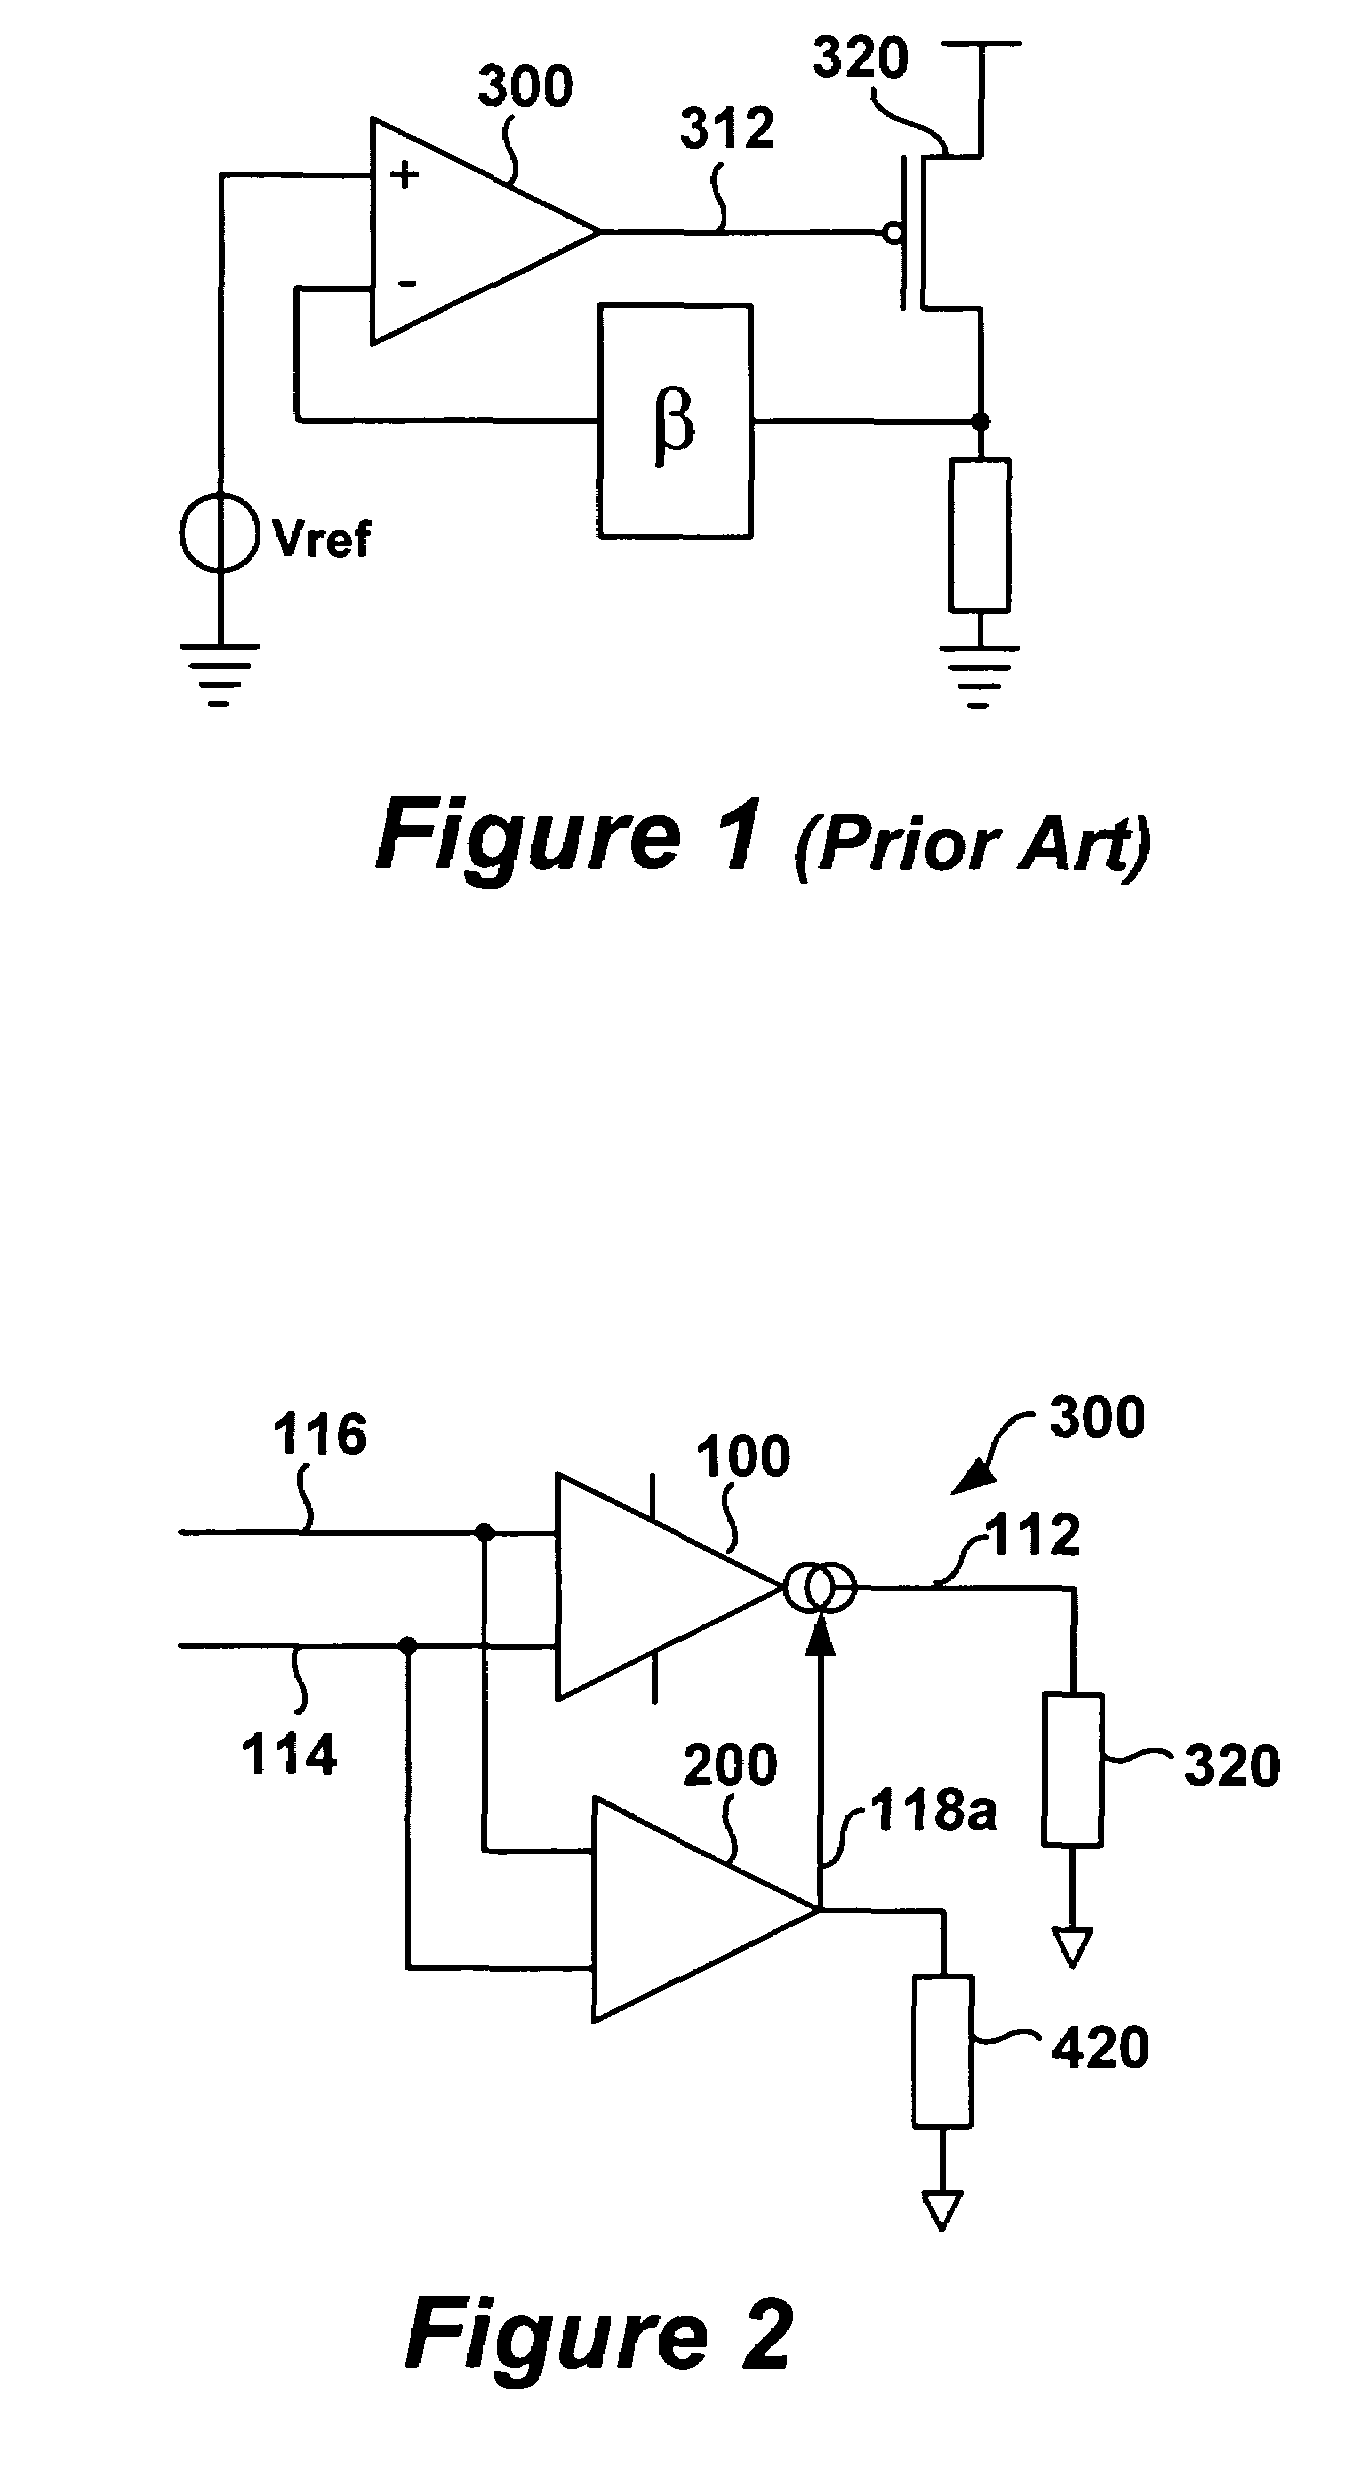 Load and line regulation using operational transconductance amplifier and operational amplifier in tandem